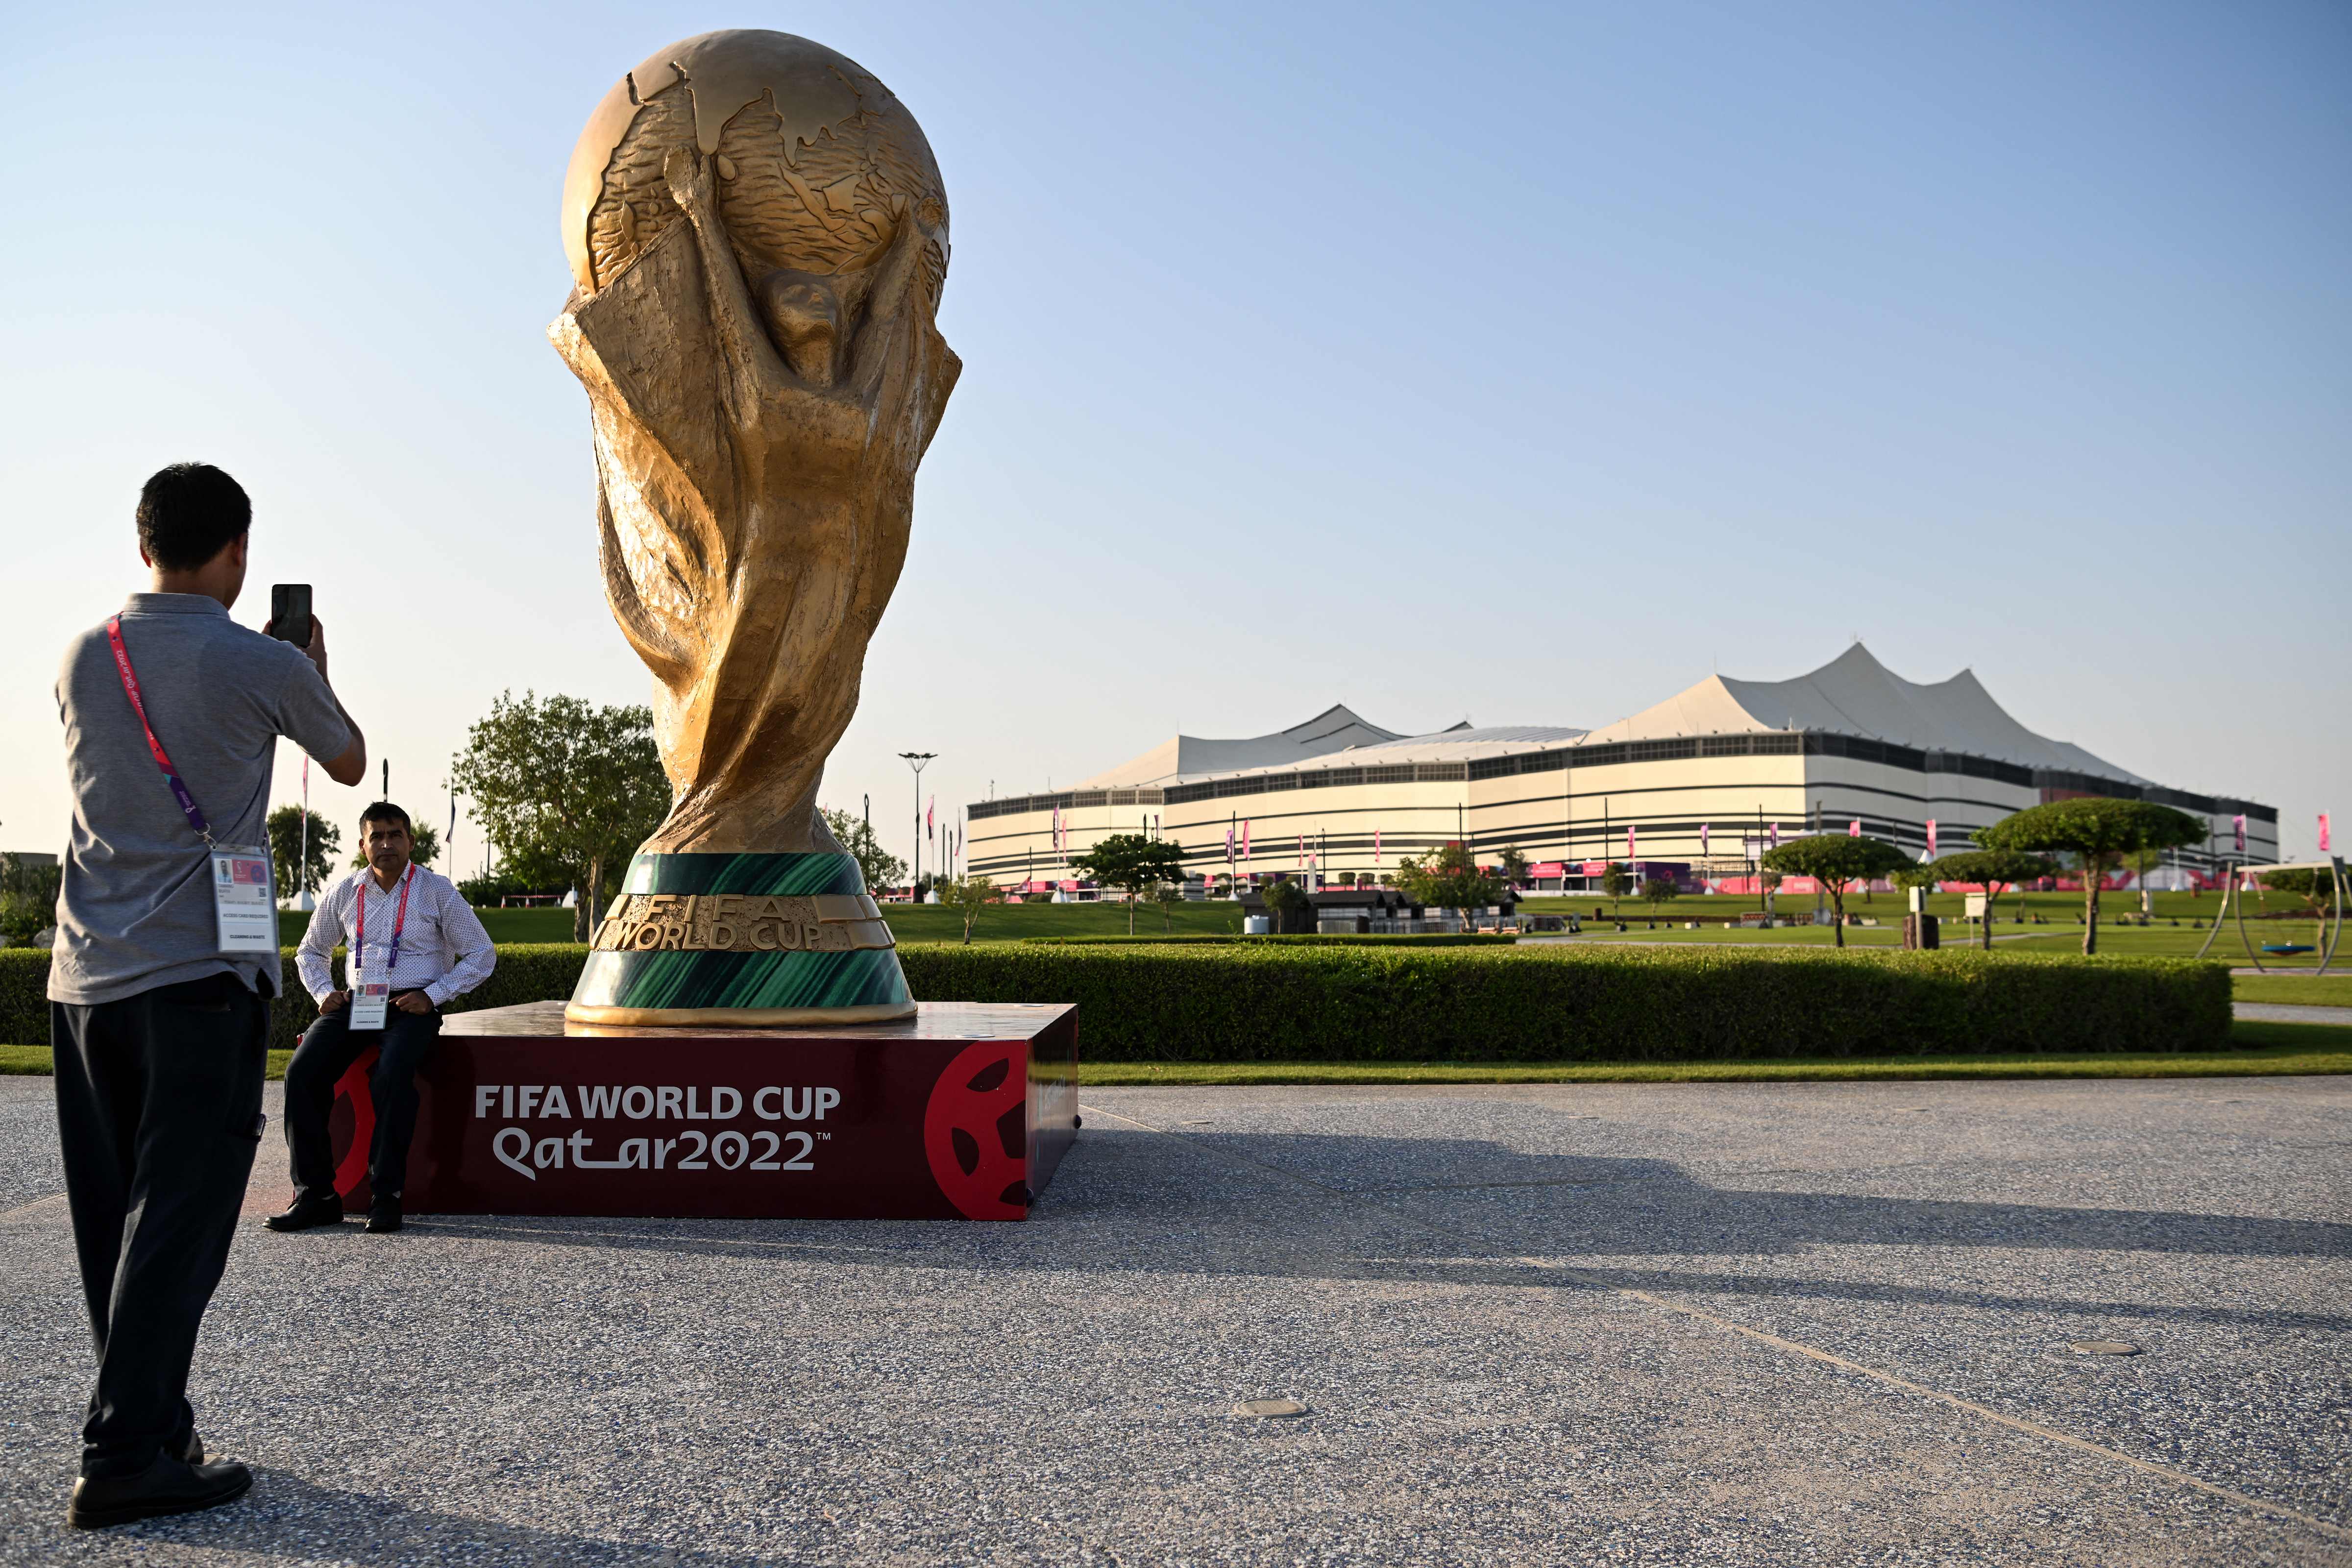 Qatar World Cup 2022: Match dates, kick-off times and how to watch